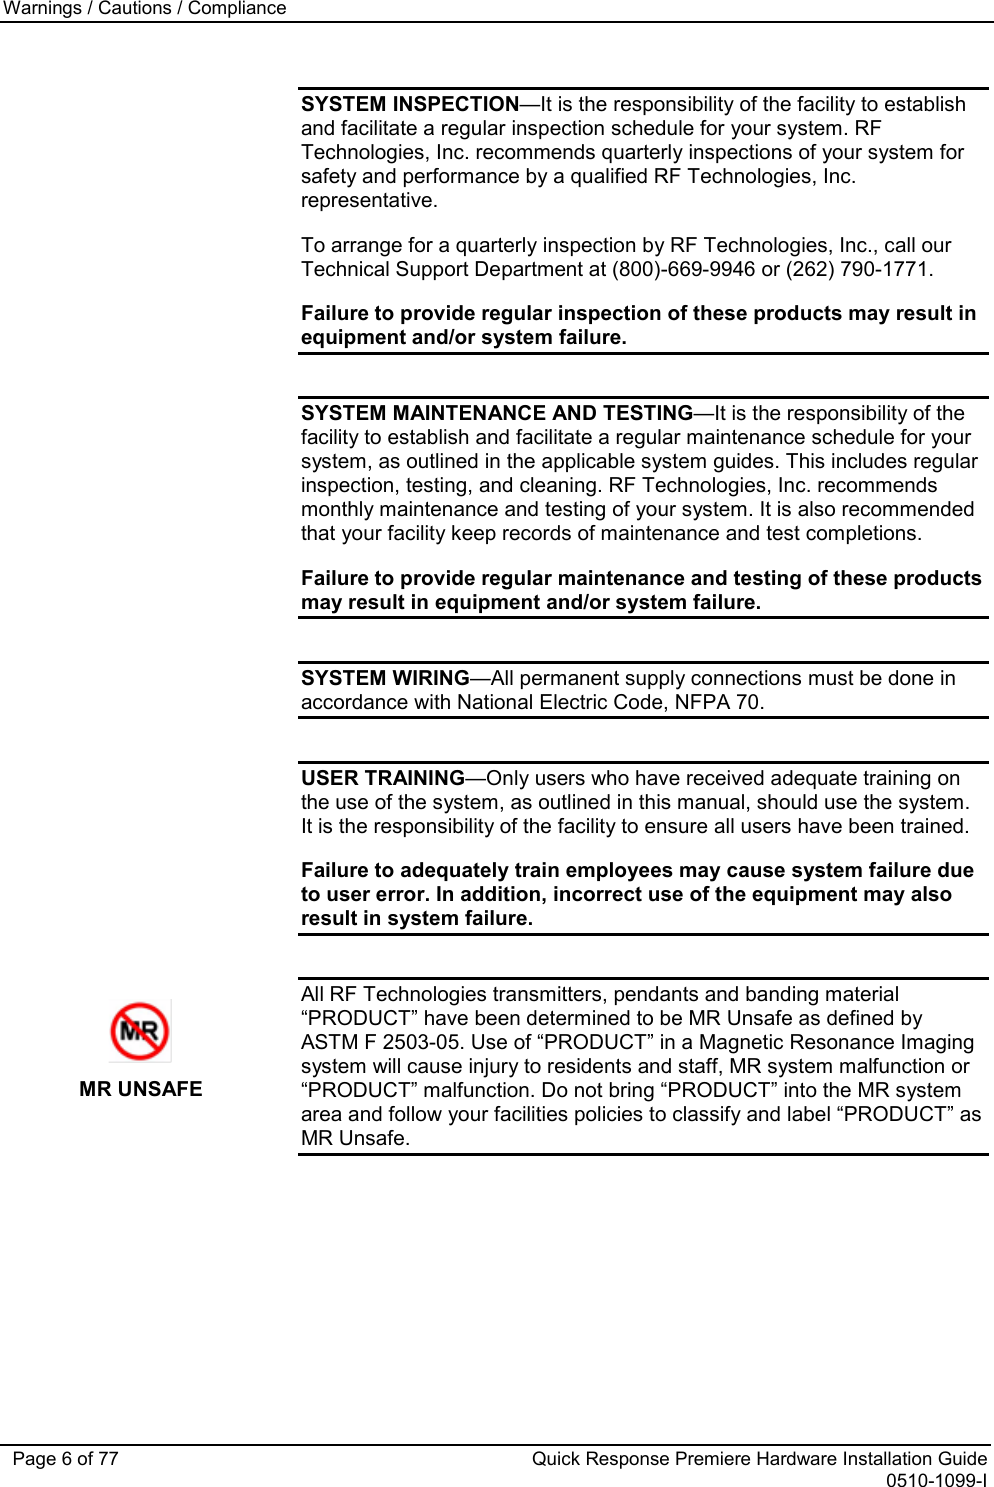 Warnings / Cautions / Compliance   Page 6 of 77 Quick Response Premiere Hardware Installation Guide 0510-1099-I  SYSTEM INSPECTION—It is the responsibility of the facility to establish and facilitate a regular inspection schedule for your system. RF Technologies, Inc. recommends quarterly inspections of your system for safety and performance by a qualified RF Technologies, Inc. representative. To arrange for a quarterly inspection by RF Technologies, Inc., call our Technical Support Department at (800)-669-9946 or (262) 790-1771. Failure to provide regular inspection of these products may result in equipment and/or system failure.  SYSTEM MAINTENANCE AND TESTING—It is the responsibility of the facility to establish and facilitate a regular maintenance schedule for your system, as outlined in the applicable system guides. This includes regular inspection, testing, and cleaning. RF Technologies, Inc. recommends monthly maintenance and testing of your system. It is also recommended that your facility keep records of maintenance and test completions. Failure to provide regular maintenance and testing of these products may result in equipment and/or system failure.  SYSTEM WIRING—All permanent supply connections must be done in accordance with National Electric Code, NFPA 70.  USER TRAINING—Only users who have received adequate training on the use of the system, as outlined in this manual, should use the system. It is the responsibility of the facility to ensure all users have been trained.  Failure to adequately train employees may cause system failure due to user error. In addition, incorrect use of the equipment may also result in system failure.   MR UNSAFE All RF Technologies transmitters, pendants and banding material “PRODUCT” have been determined to be MR Unsafe as defined by ASTM F 2503-05. Use of “PRODUCT” in a Magnetic Resonance Imaging system will cause injury to residents and staff, MR system malfunction or “PRODUCT” malfunction. Do not bring “PRODUCT” into the MR system area and follow your facilities policies to classify and label “PRODUCT” as MR Unsafe. 